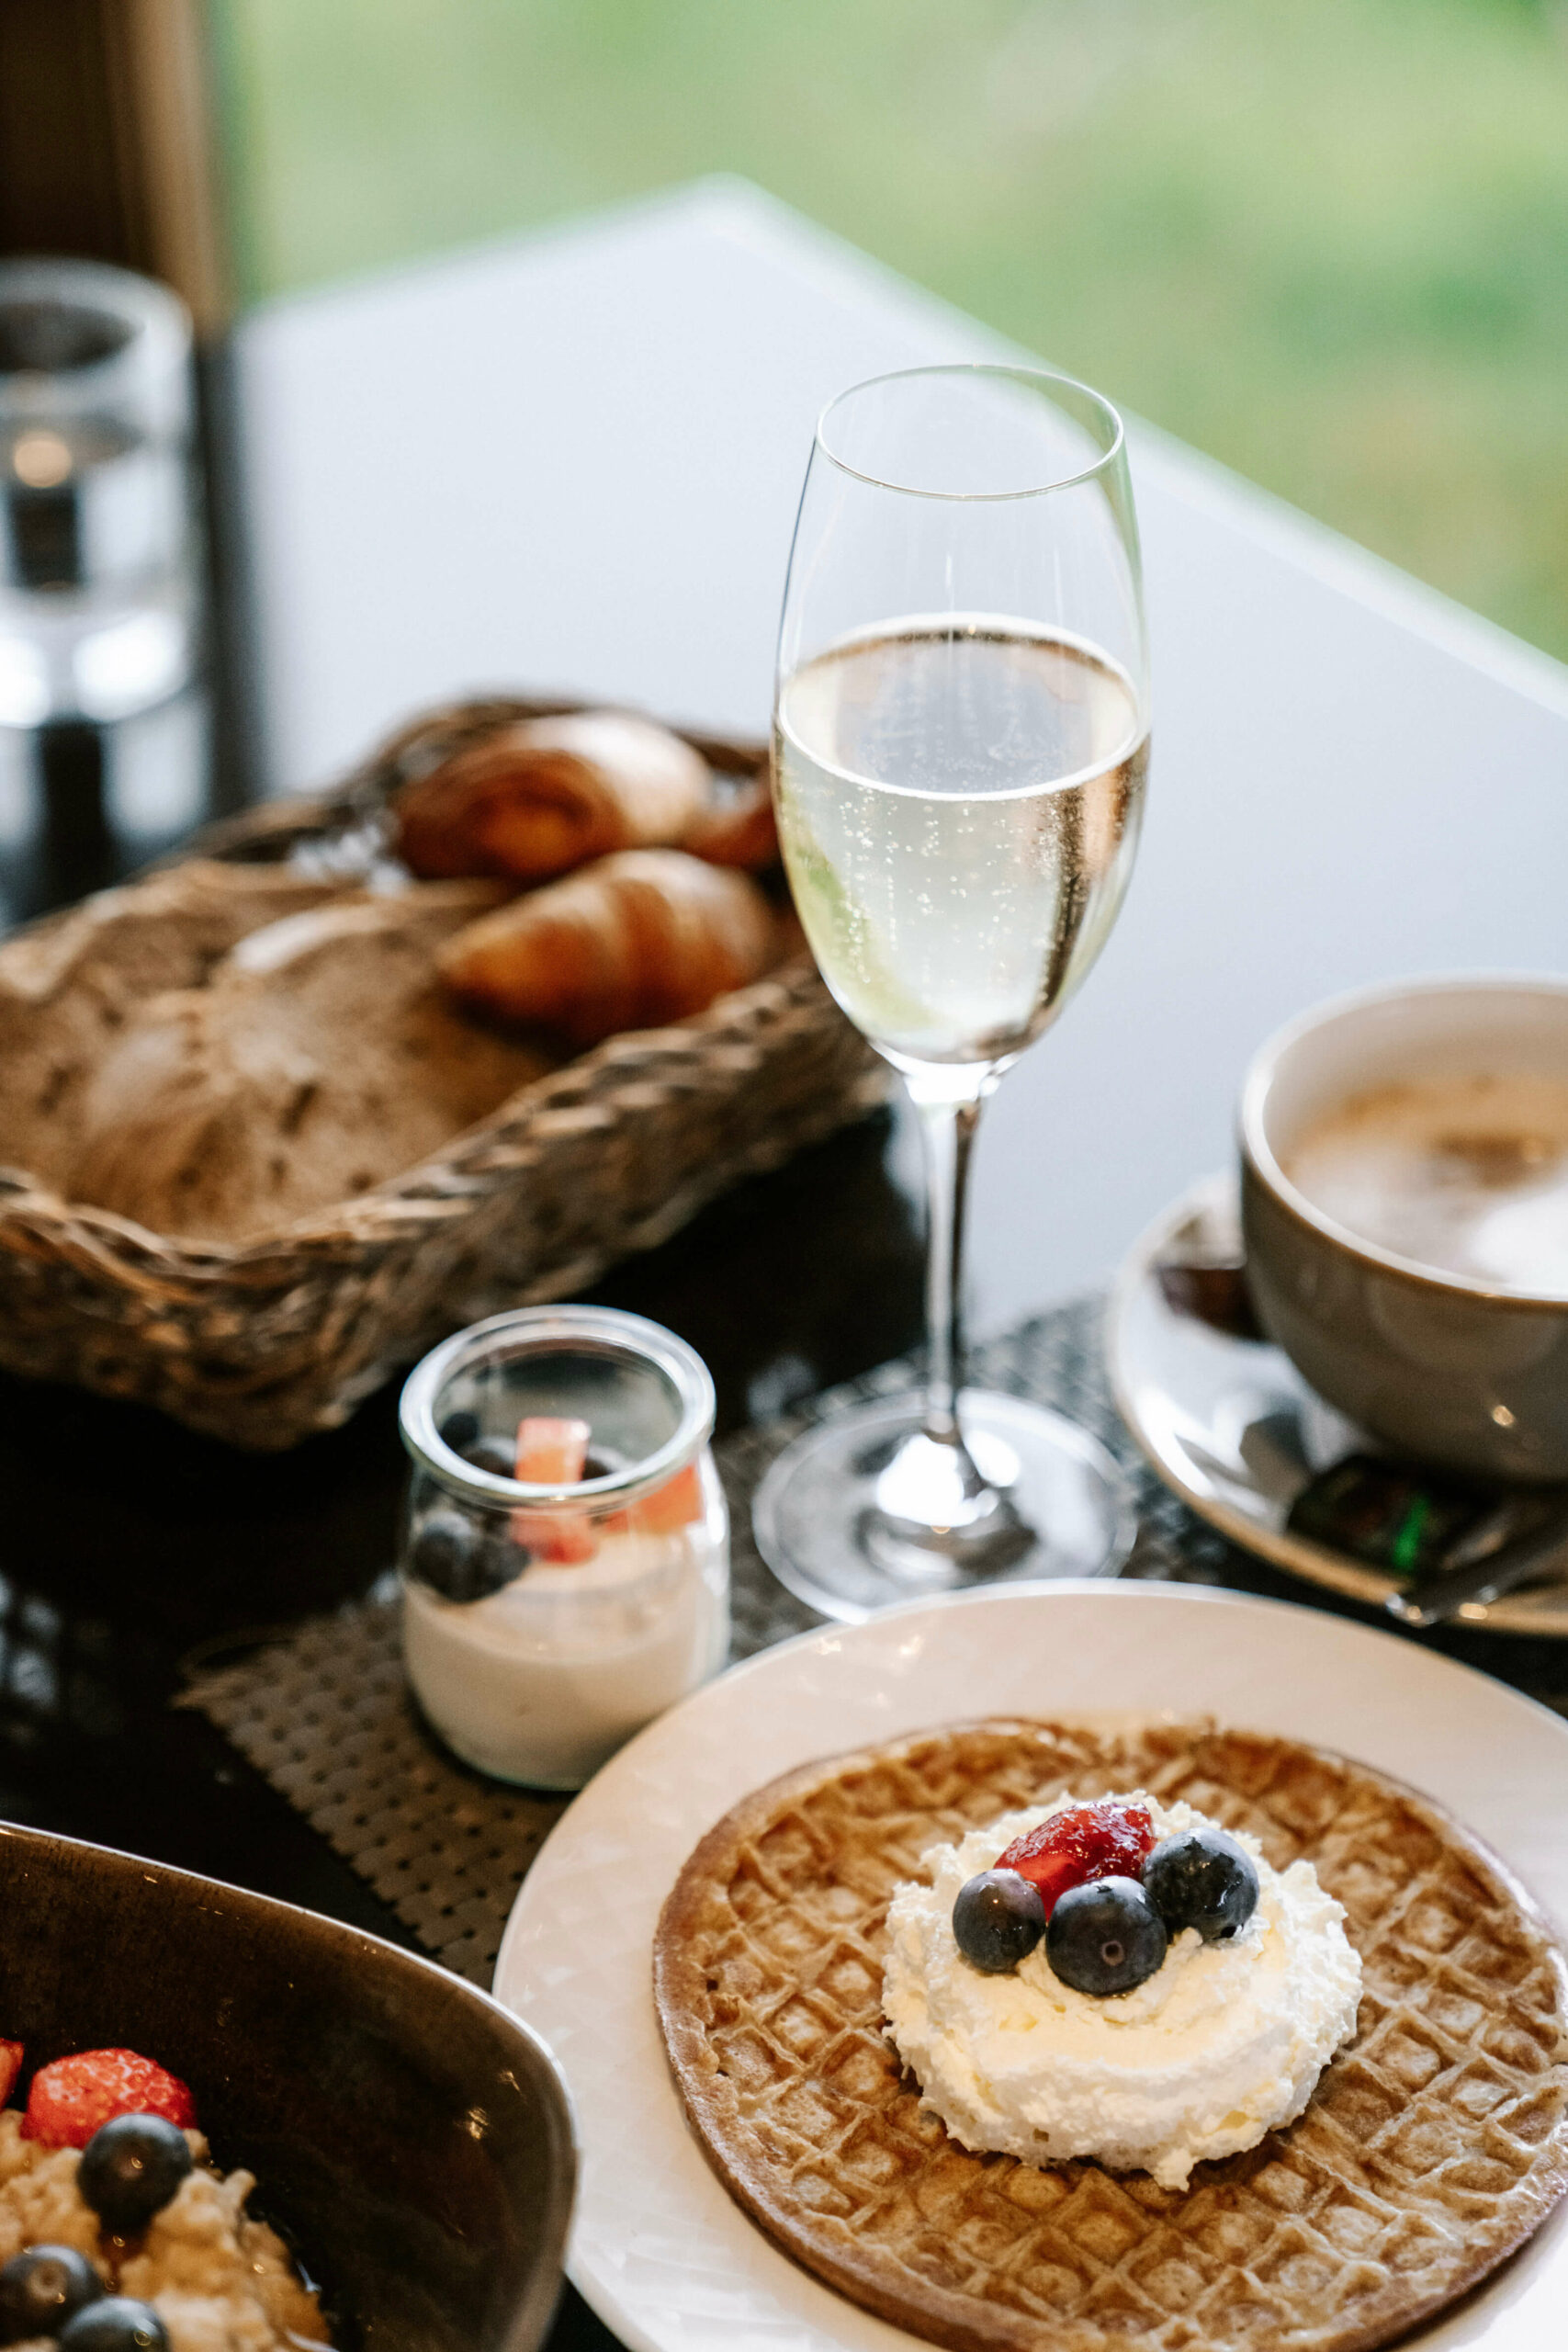 Savor a delectable breakfast at Hotel Rangá featuring a tempting waffle topped with cream and blueberries, accompanied by a refreshing champagne mimosa.